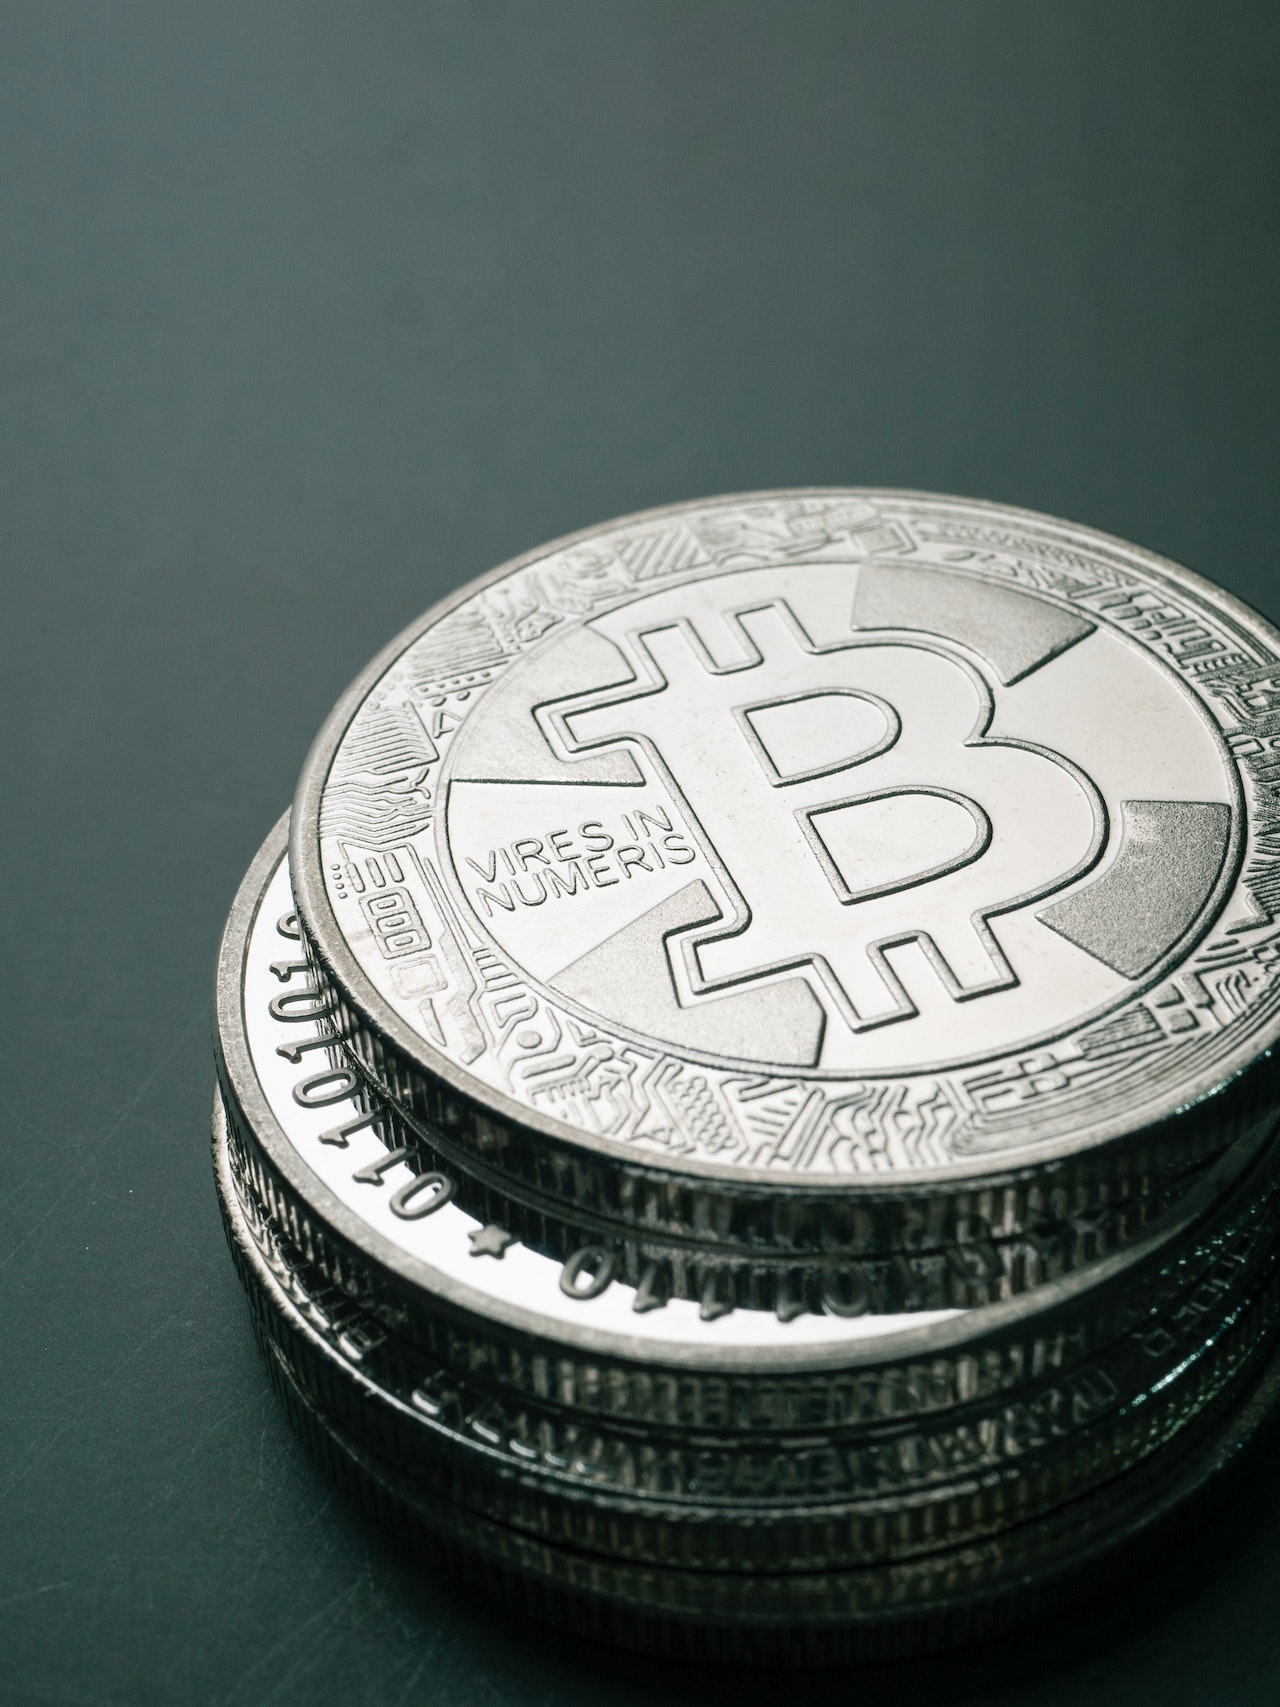 3 Experts Take On The Bitcoin Price, Will $19,000 Hold Or Break?